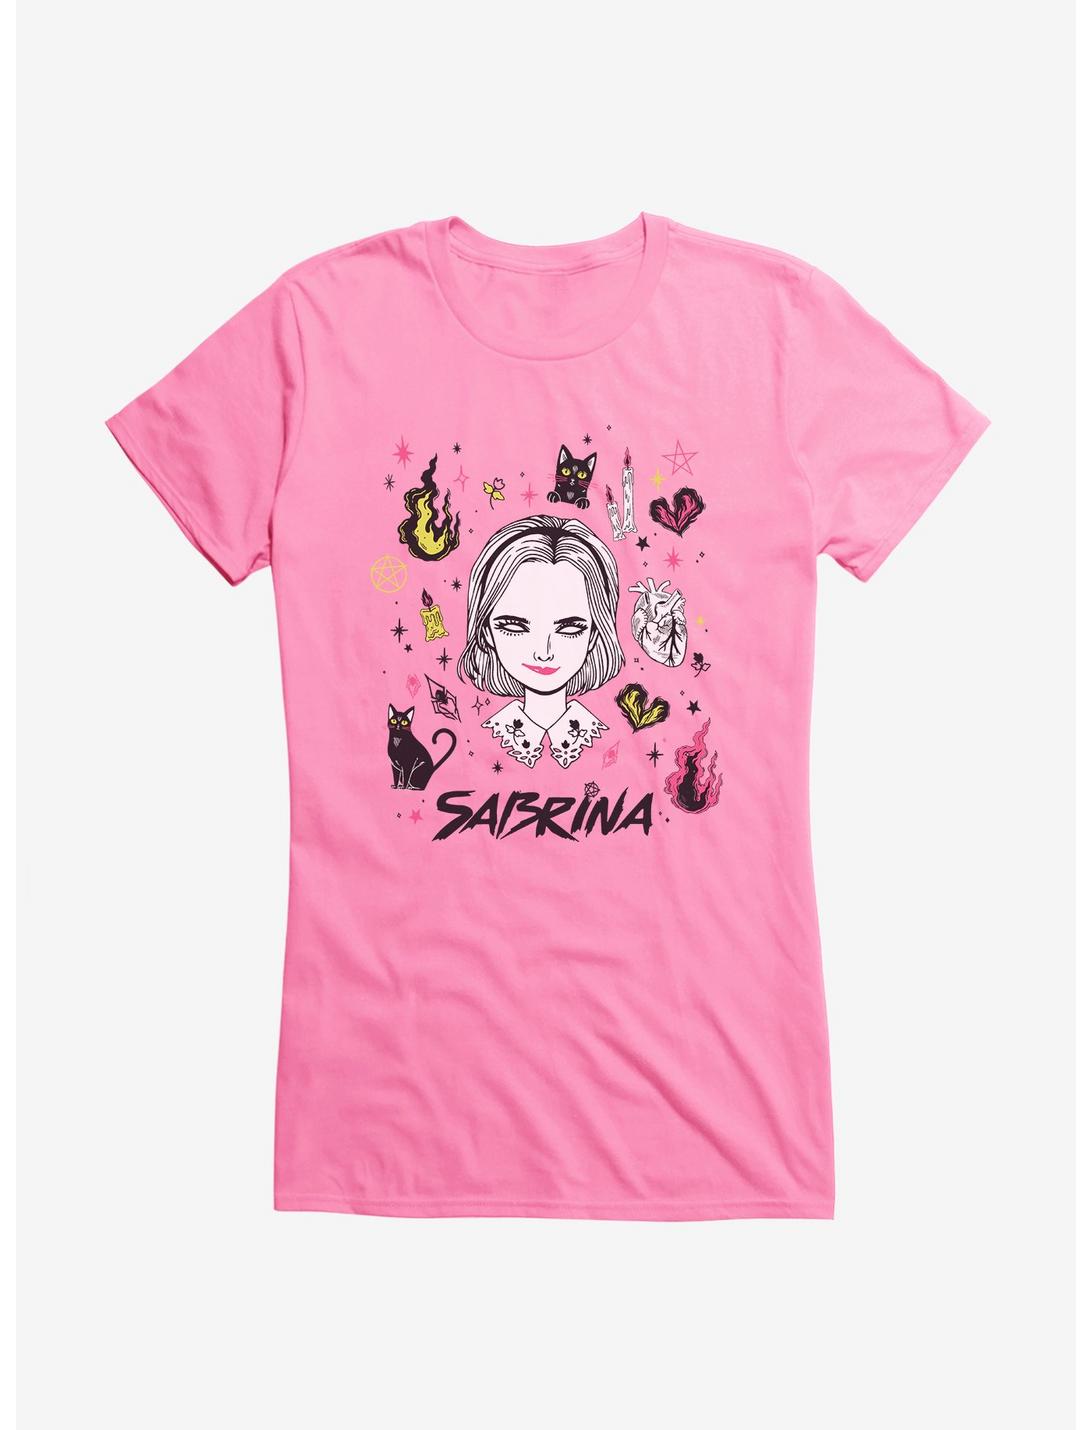 Chilling Adventures Of Sabrina Salem Icon Girls T-Shirt, CHARITY PINK, hi-res